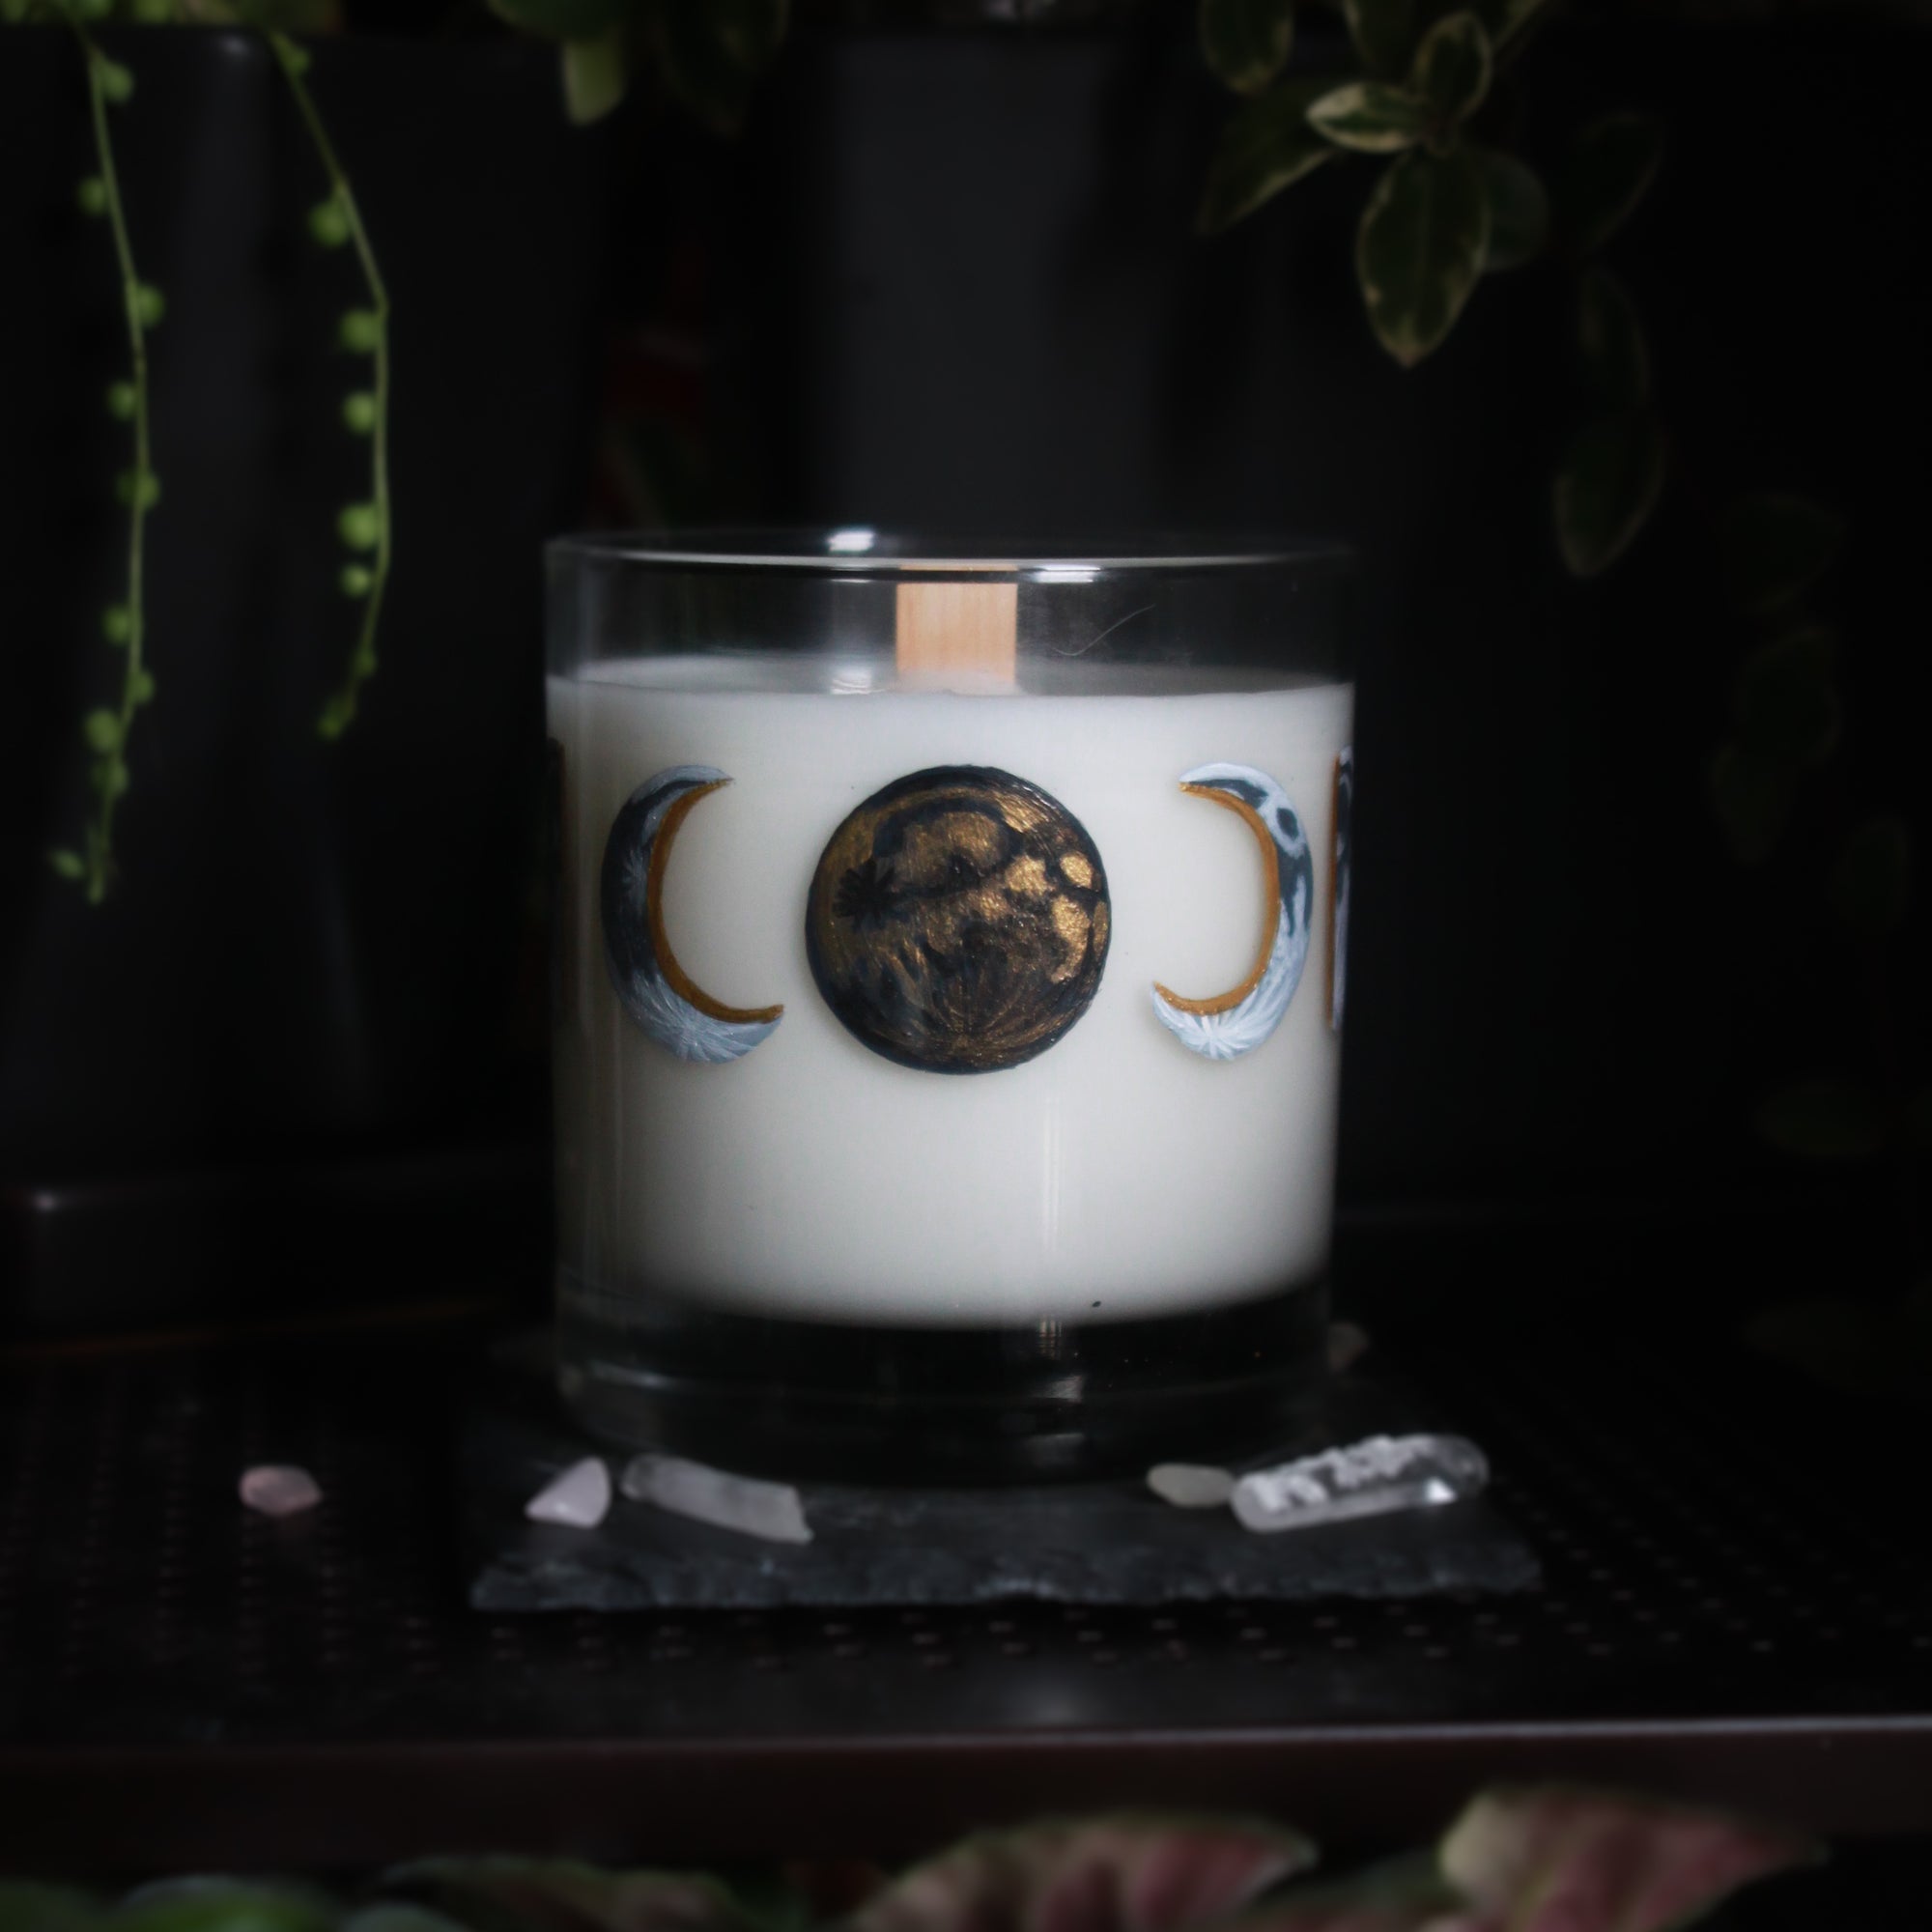 A white-wax candle with a wooden wick rests upon a dark surface with plants and crystals visible in the scene. The light candle stands out in contrast against the dark background. The candle glass has 8 phases of the moon painted in shades of gray with gold accents circling the glass. This angle depicts the new moon centered with crescent moons on either side facing it. The new moon is painted in solid black with metallic gold shading.